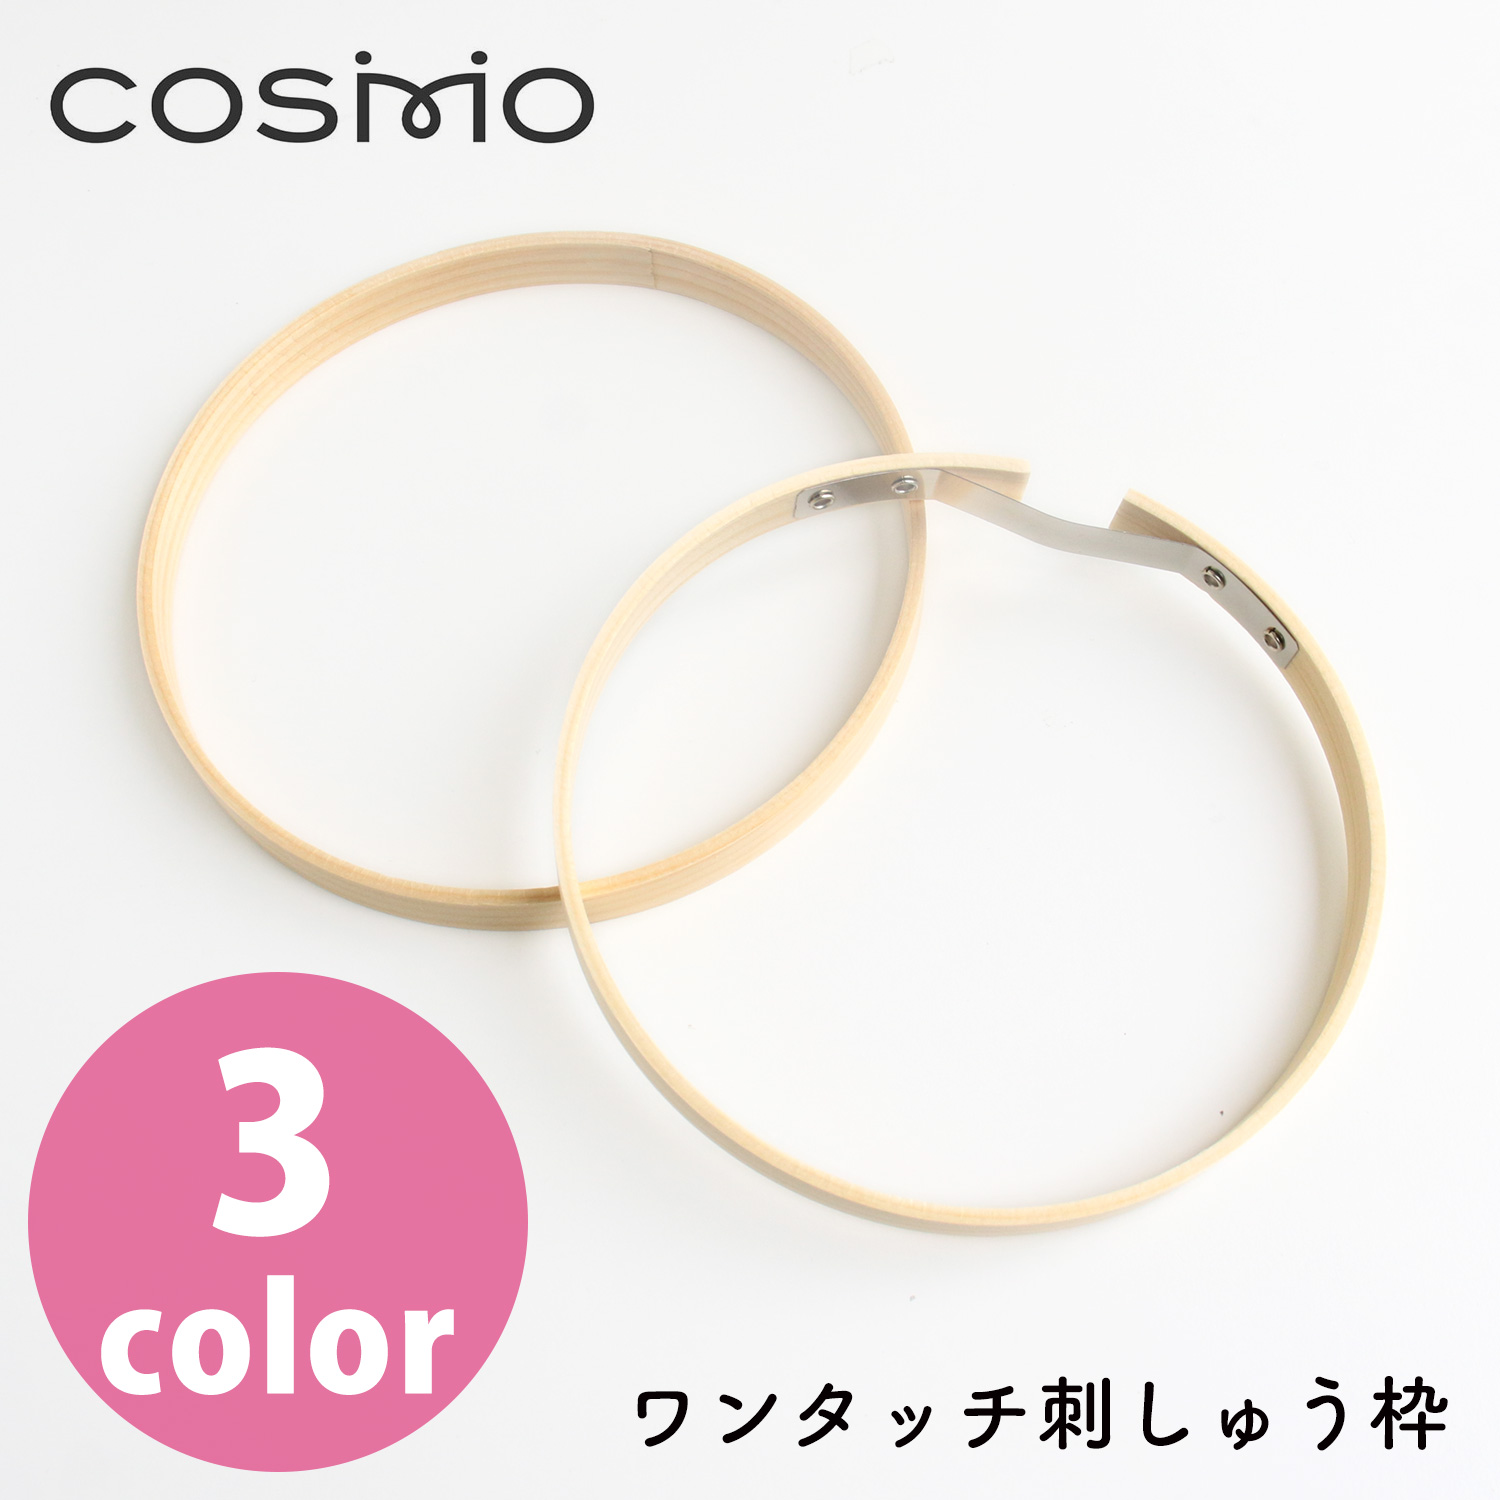 CS93-1~3 COSMO one-touch embroidery hoop (pcs)